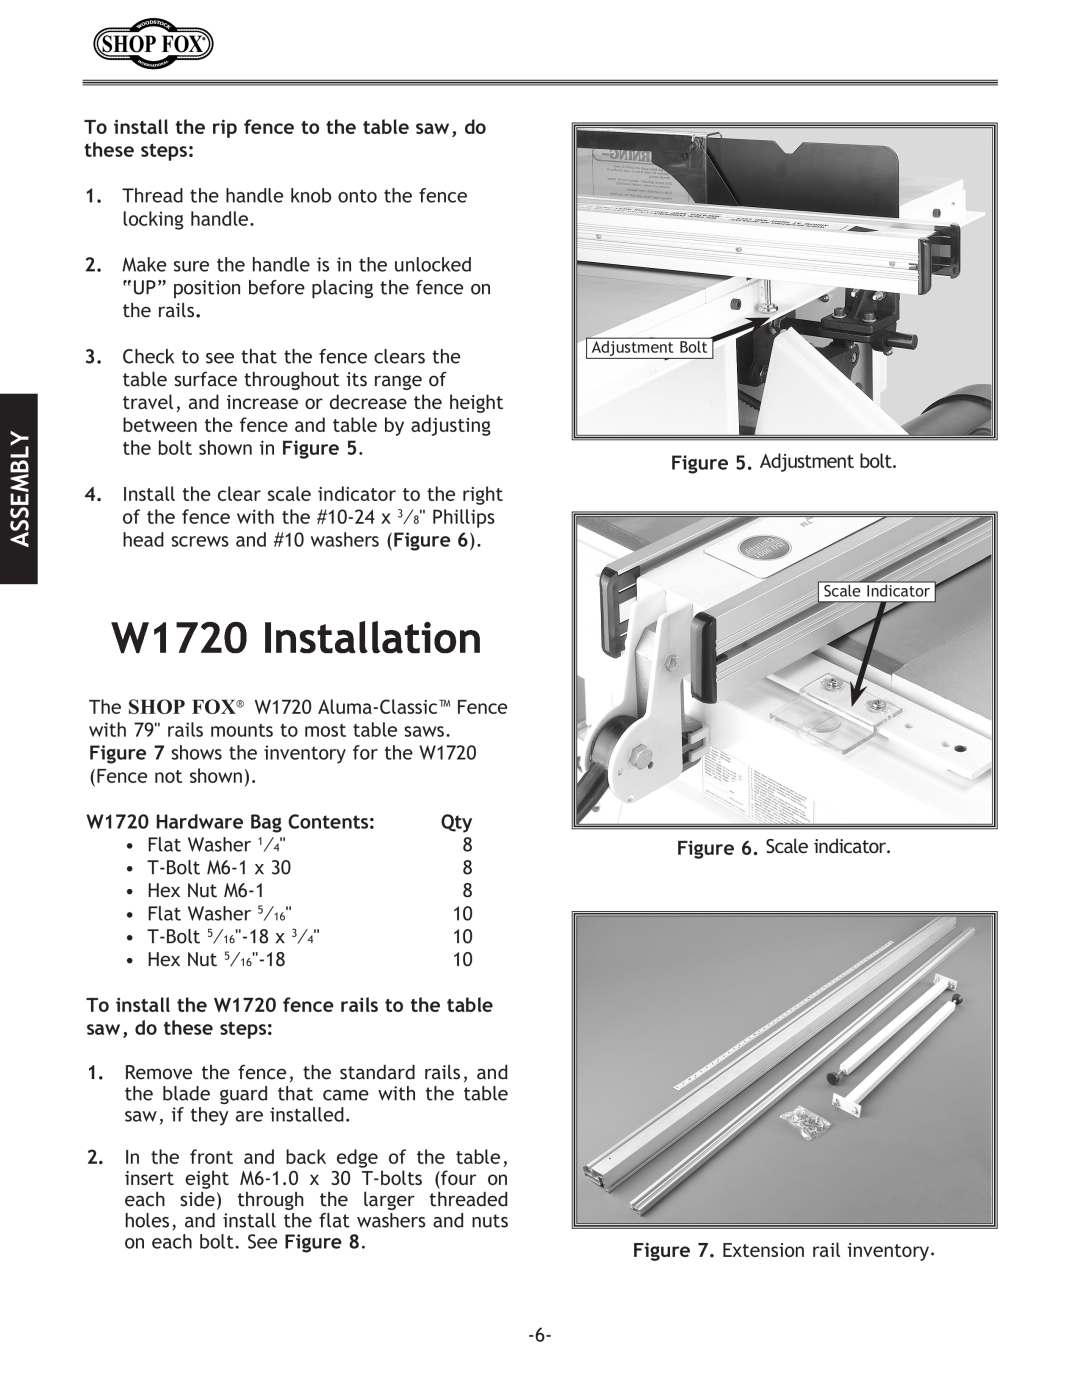 Woodstock W1716 instruction manual W1720 Installation, Assembly, W1720 Hardware Bag Contents 